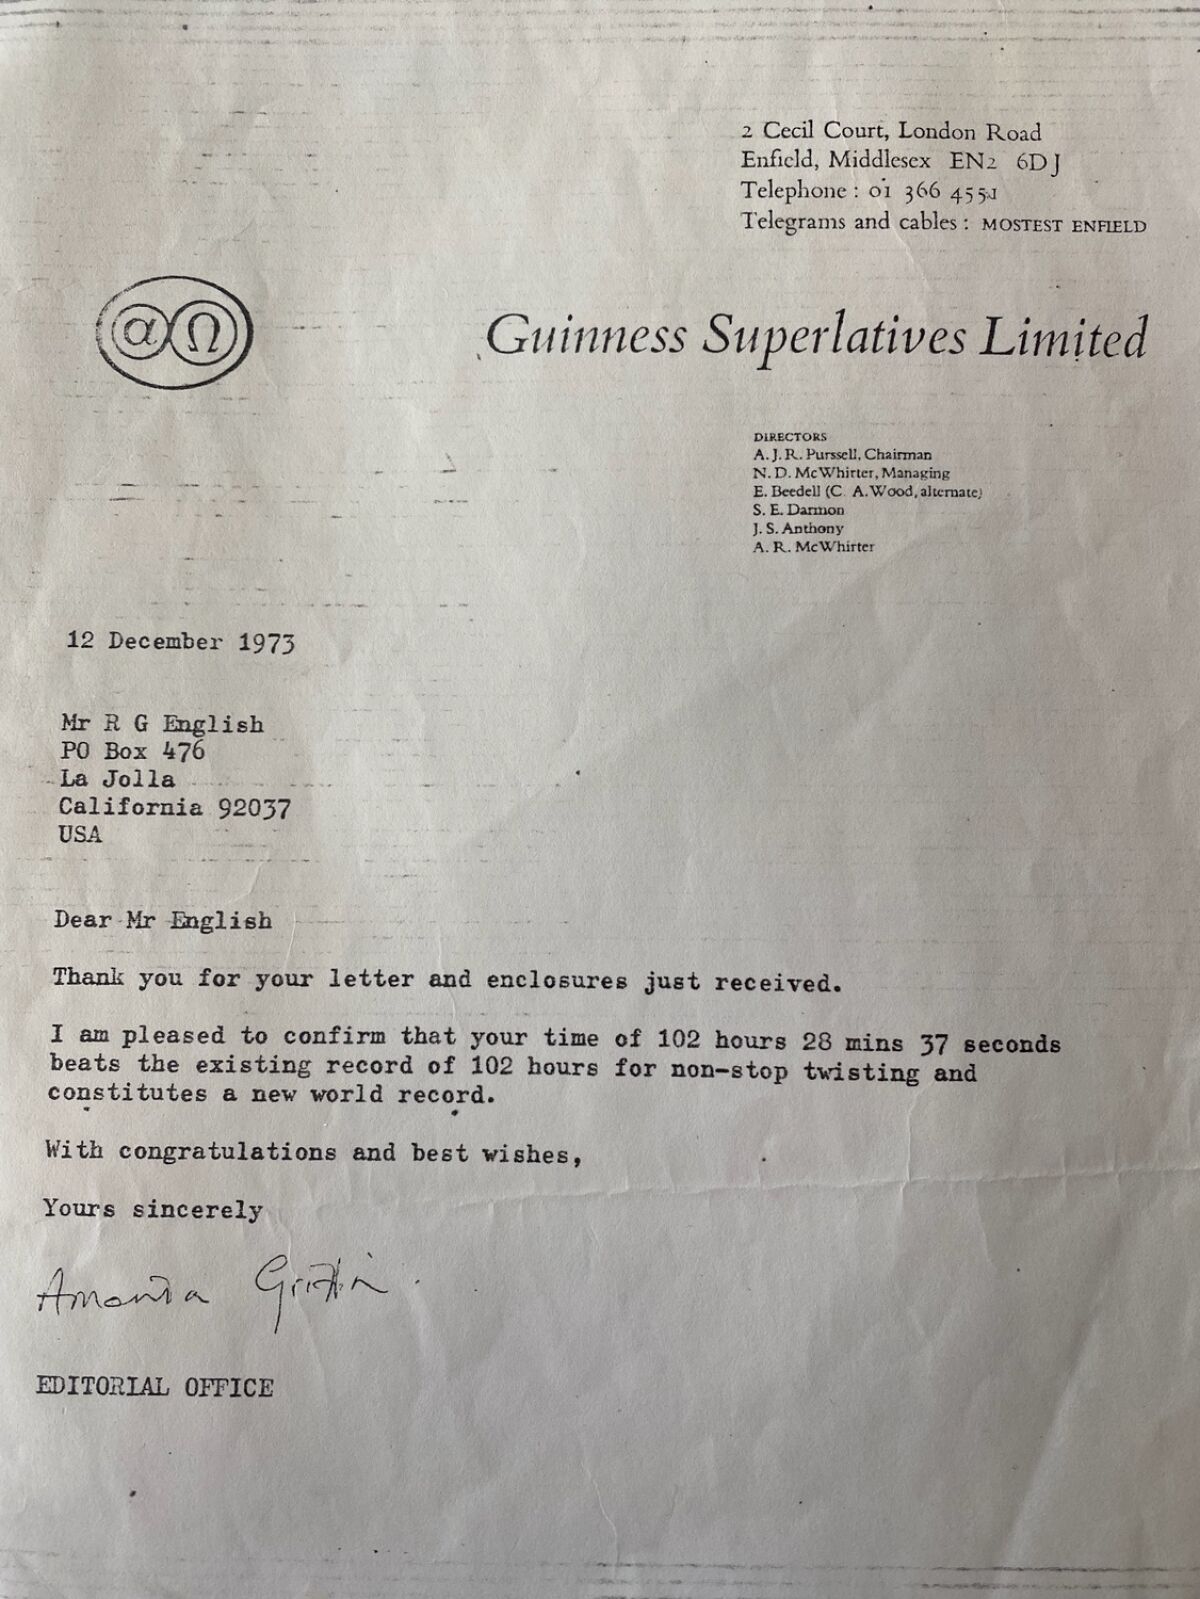 Roger Guy English received this letter from Guinness for his Twisting feat.